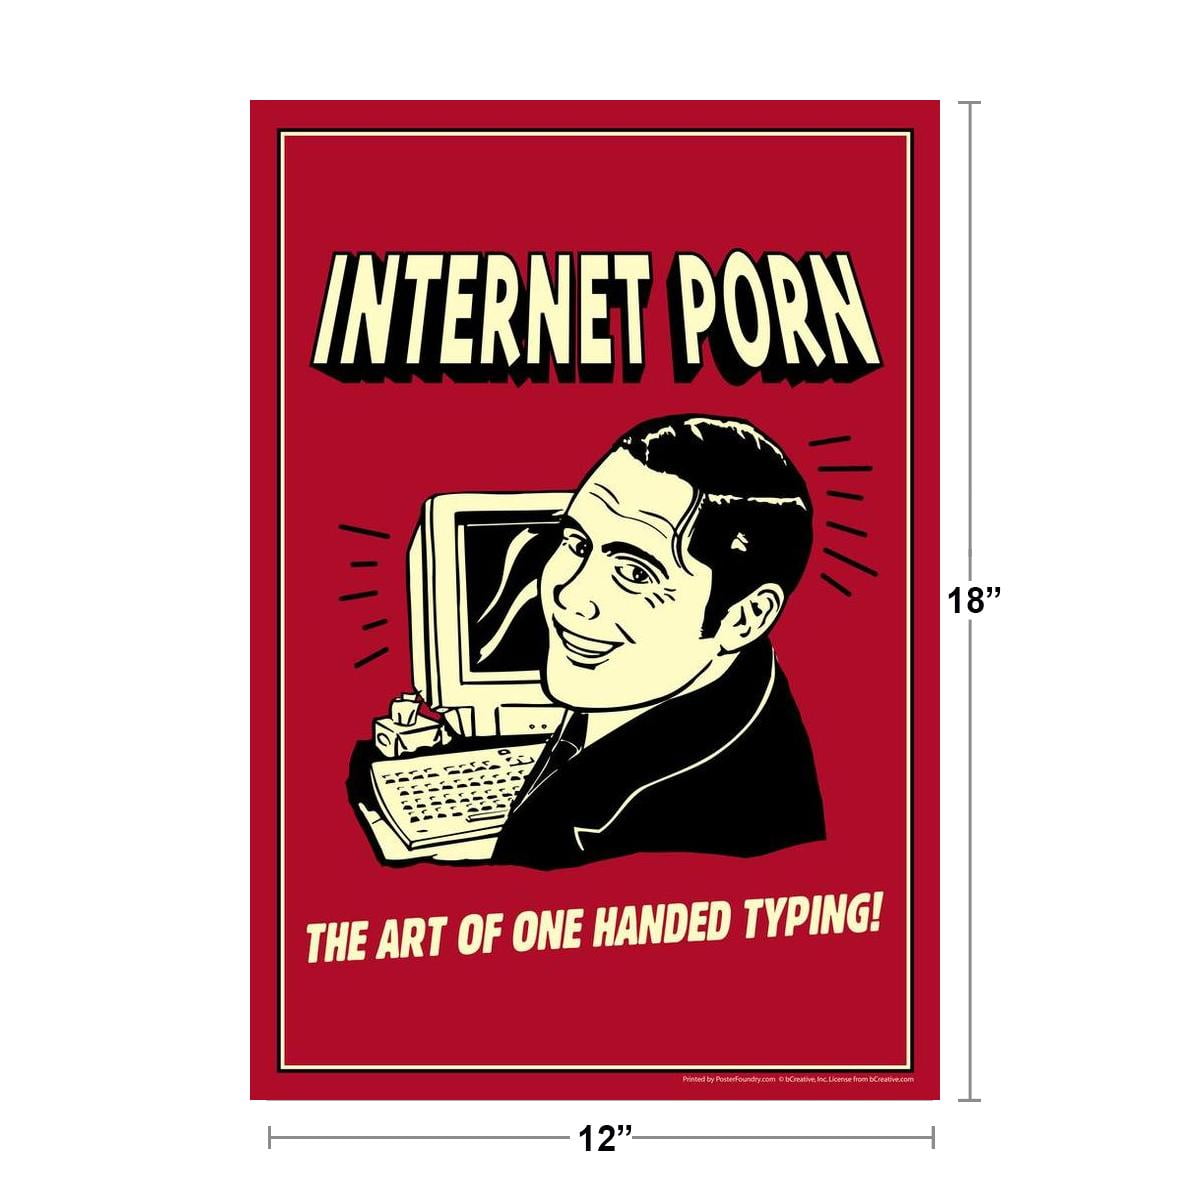 Funny Porn Humor Posters - Internet Porn The Art of One Handed Typing! Retro Humor Cool Wall Decor Art  Print Poster 12x18 - Walmart.com